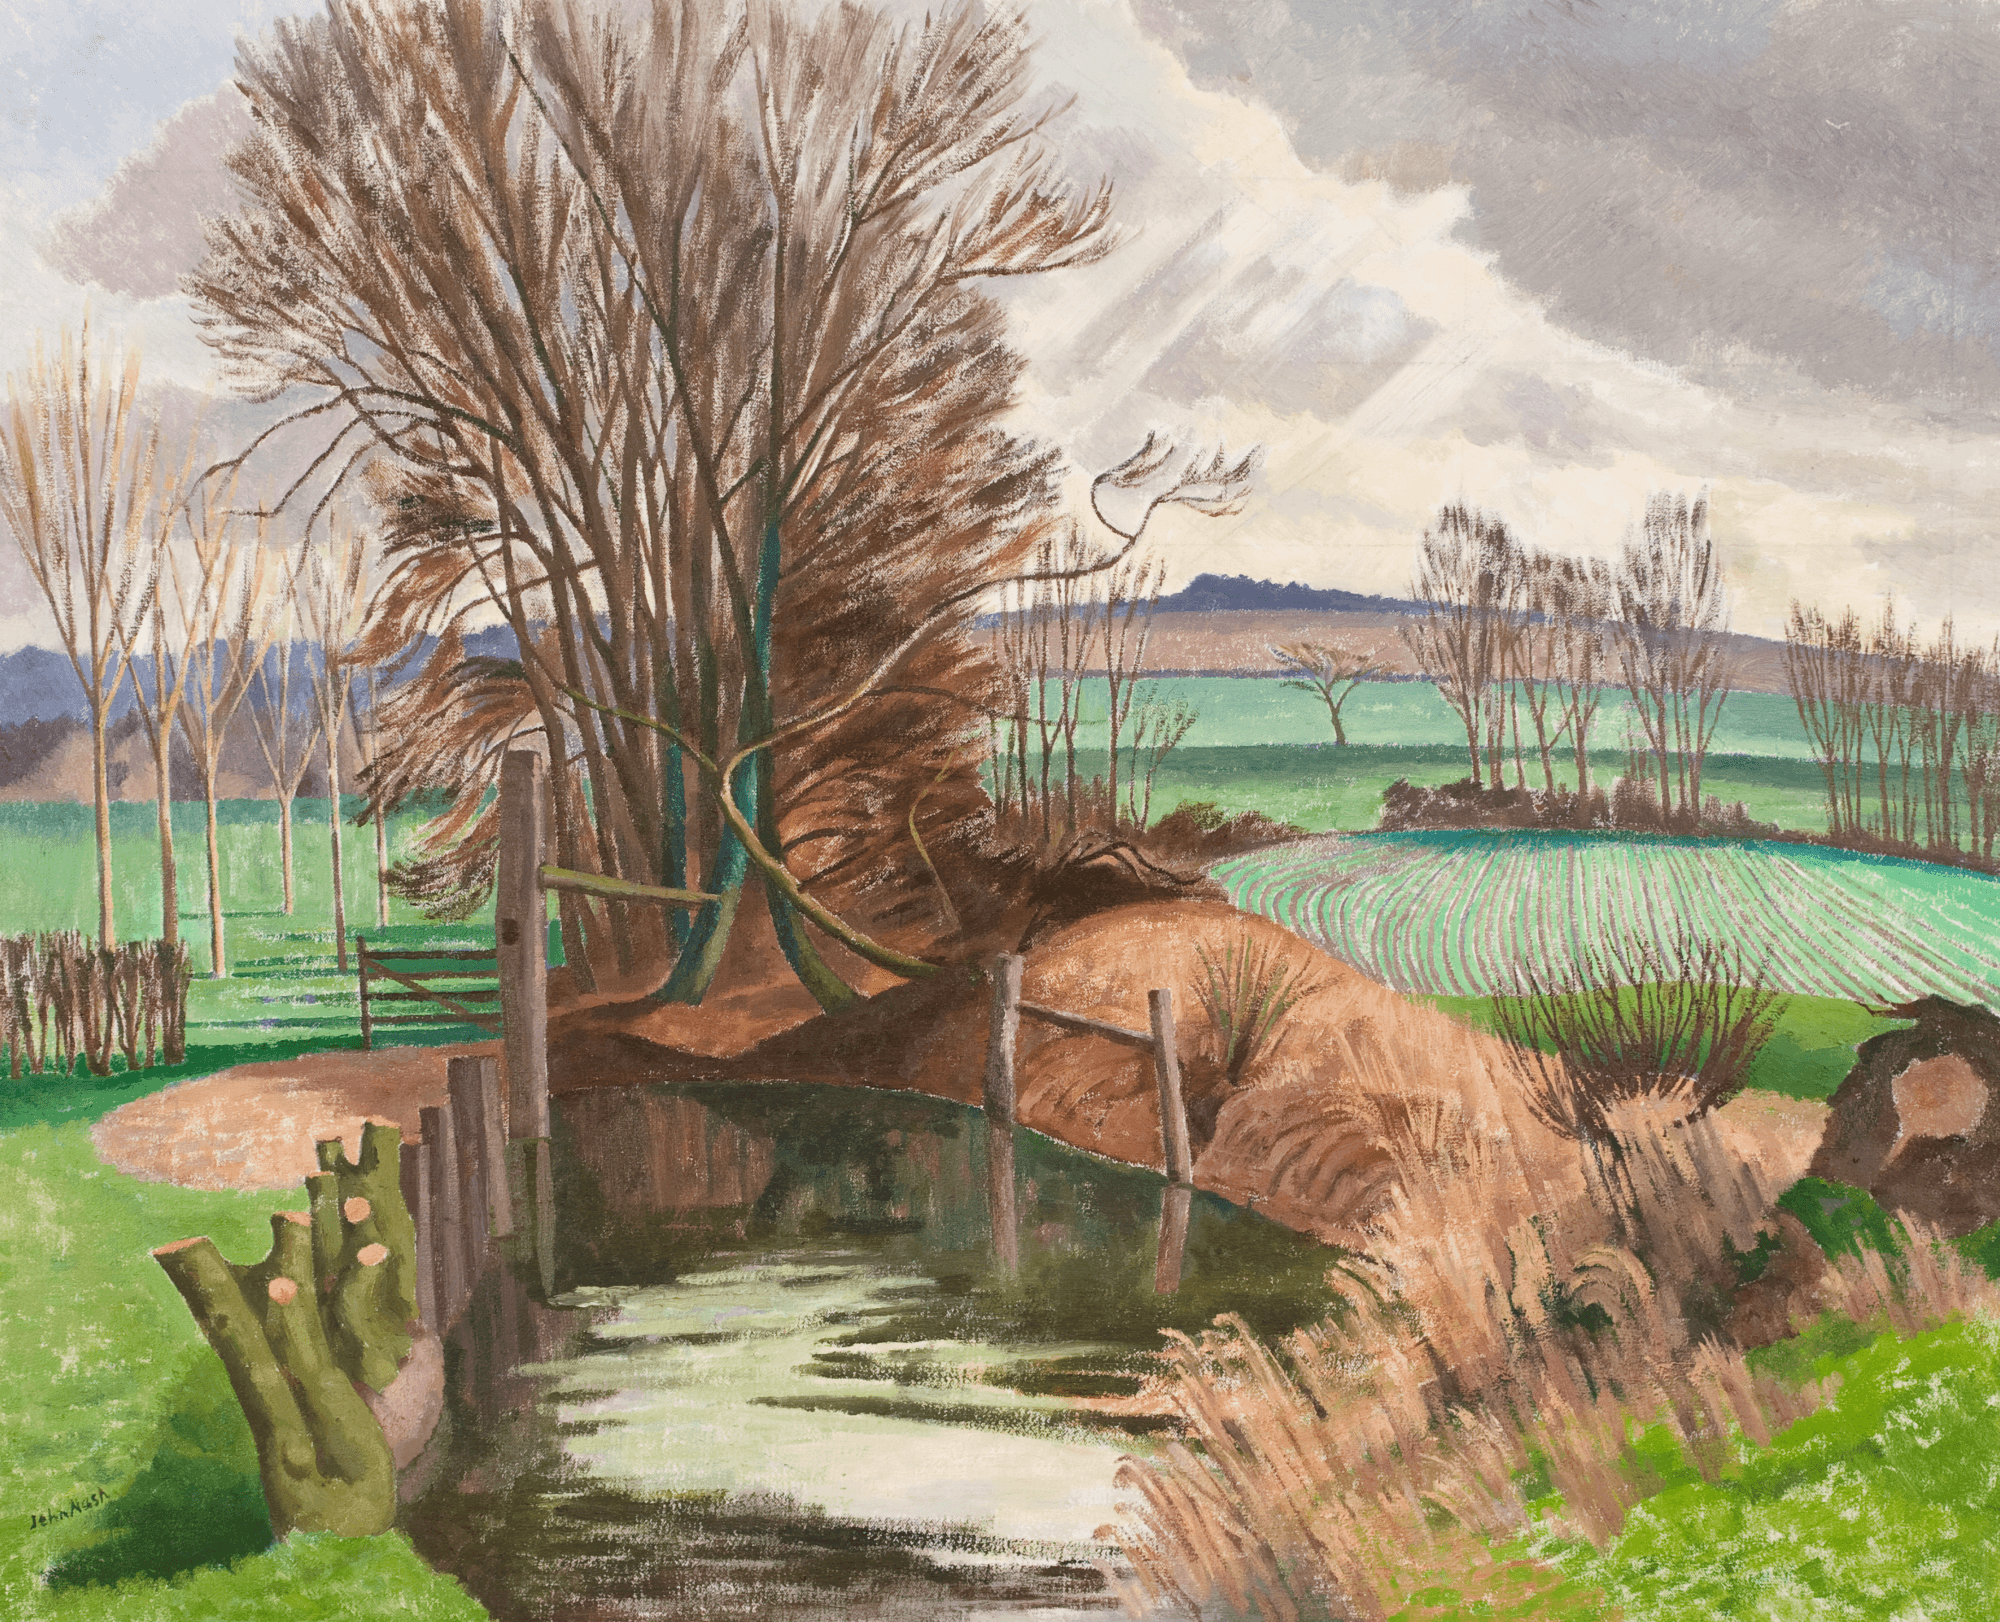 John Nash, 'Disused Canal, Wormingford, Essex, c.1940s. ©The Artist's Estate. Towner Collection